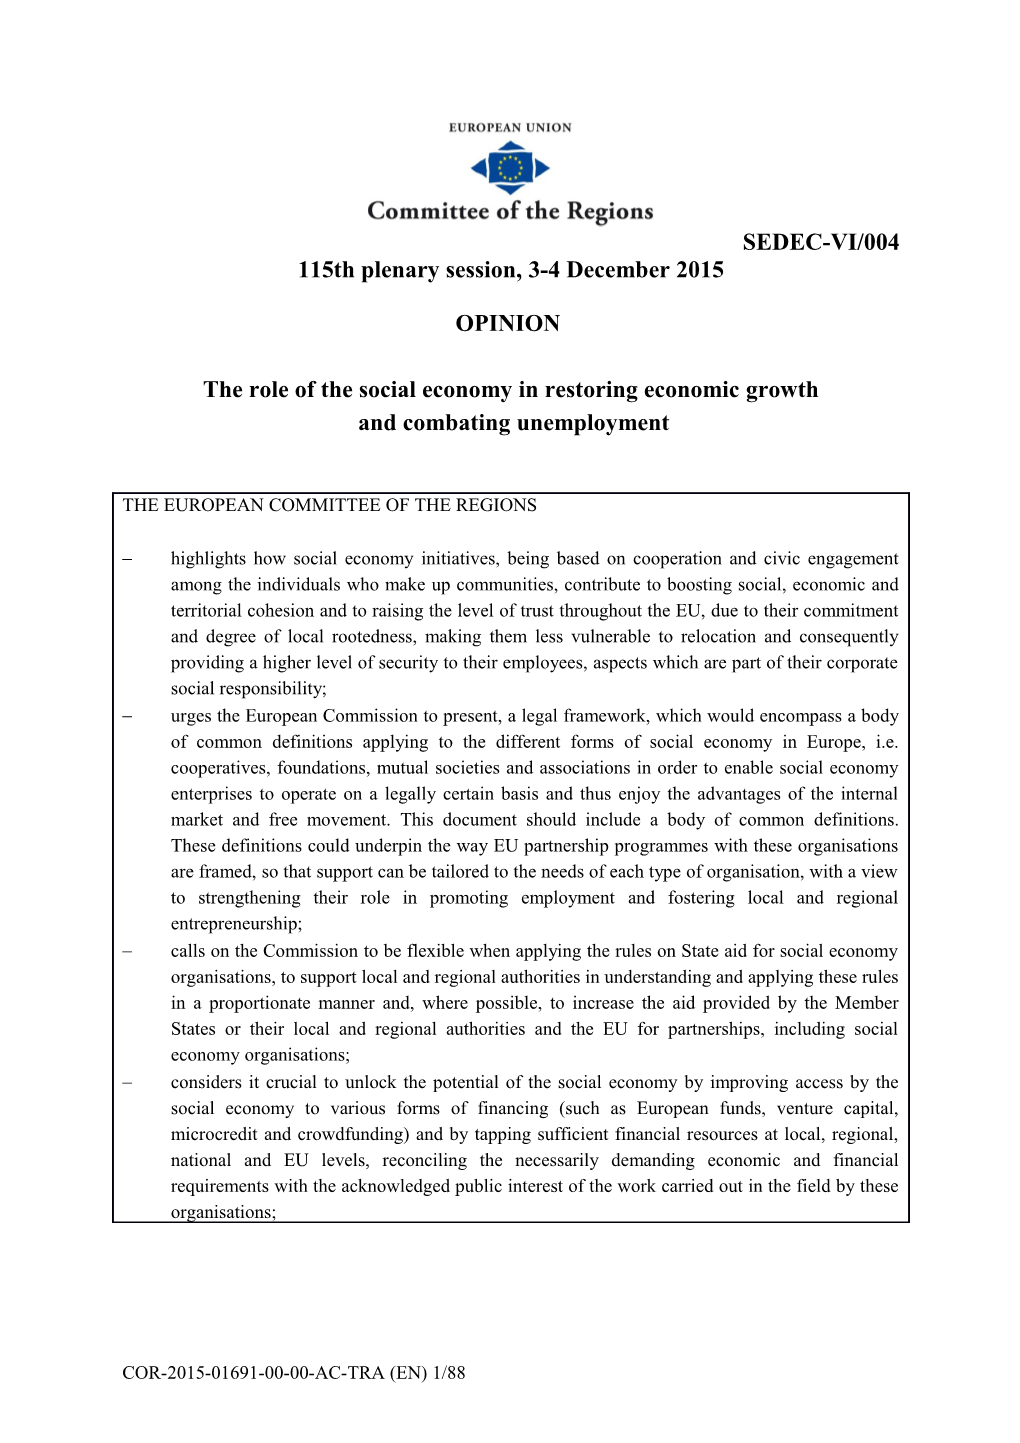 The Role of the Social Economy in Restoring Economic Growth and Combating Unemployment